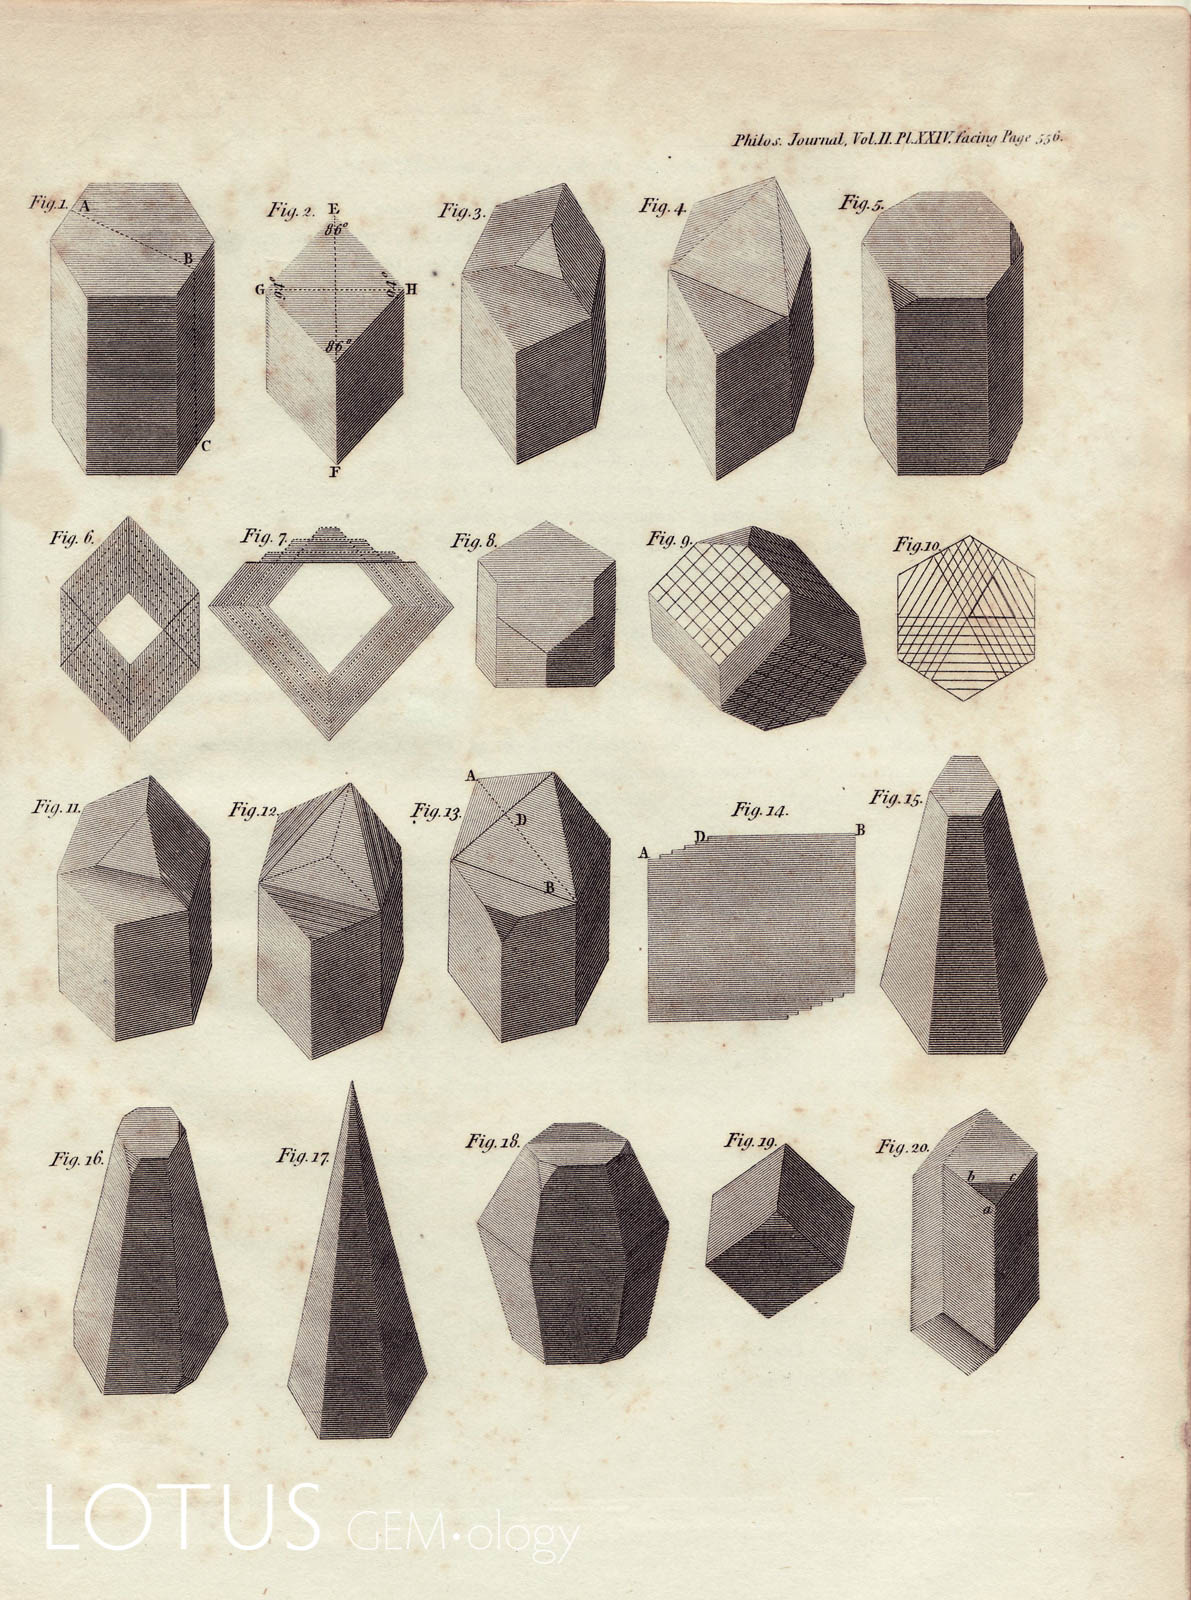 Corundum crystals from Charles Greville's 1799 publication. With Count de Bournon and Charles Greville's landmark papers, the Western world learned for the first time that ruby and sapphire represent a single mineral species, dubbed corundum after the Indian word for the same mineral—kurundum. Alas, that knowledge had been known in Asia for at least a thousand years.